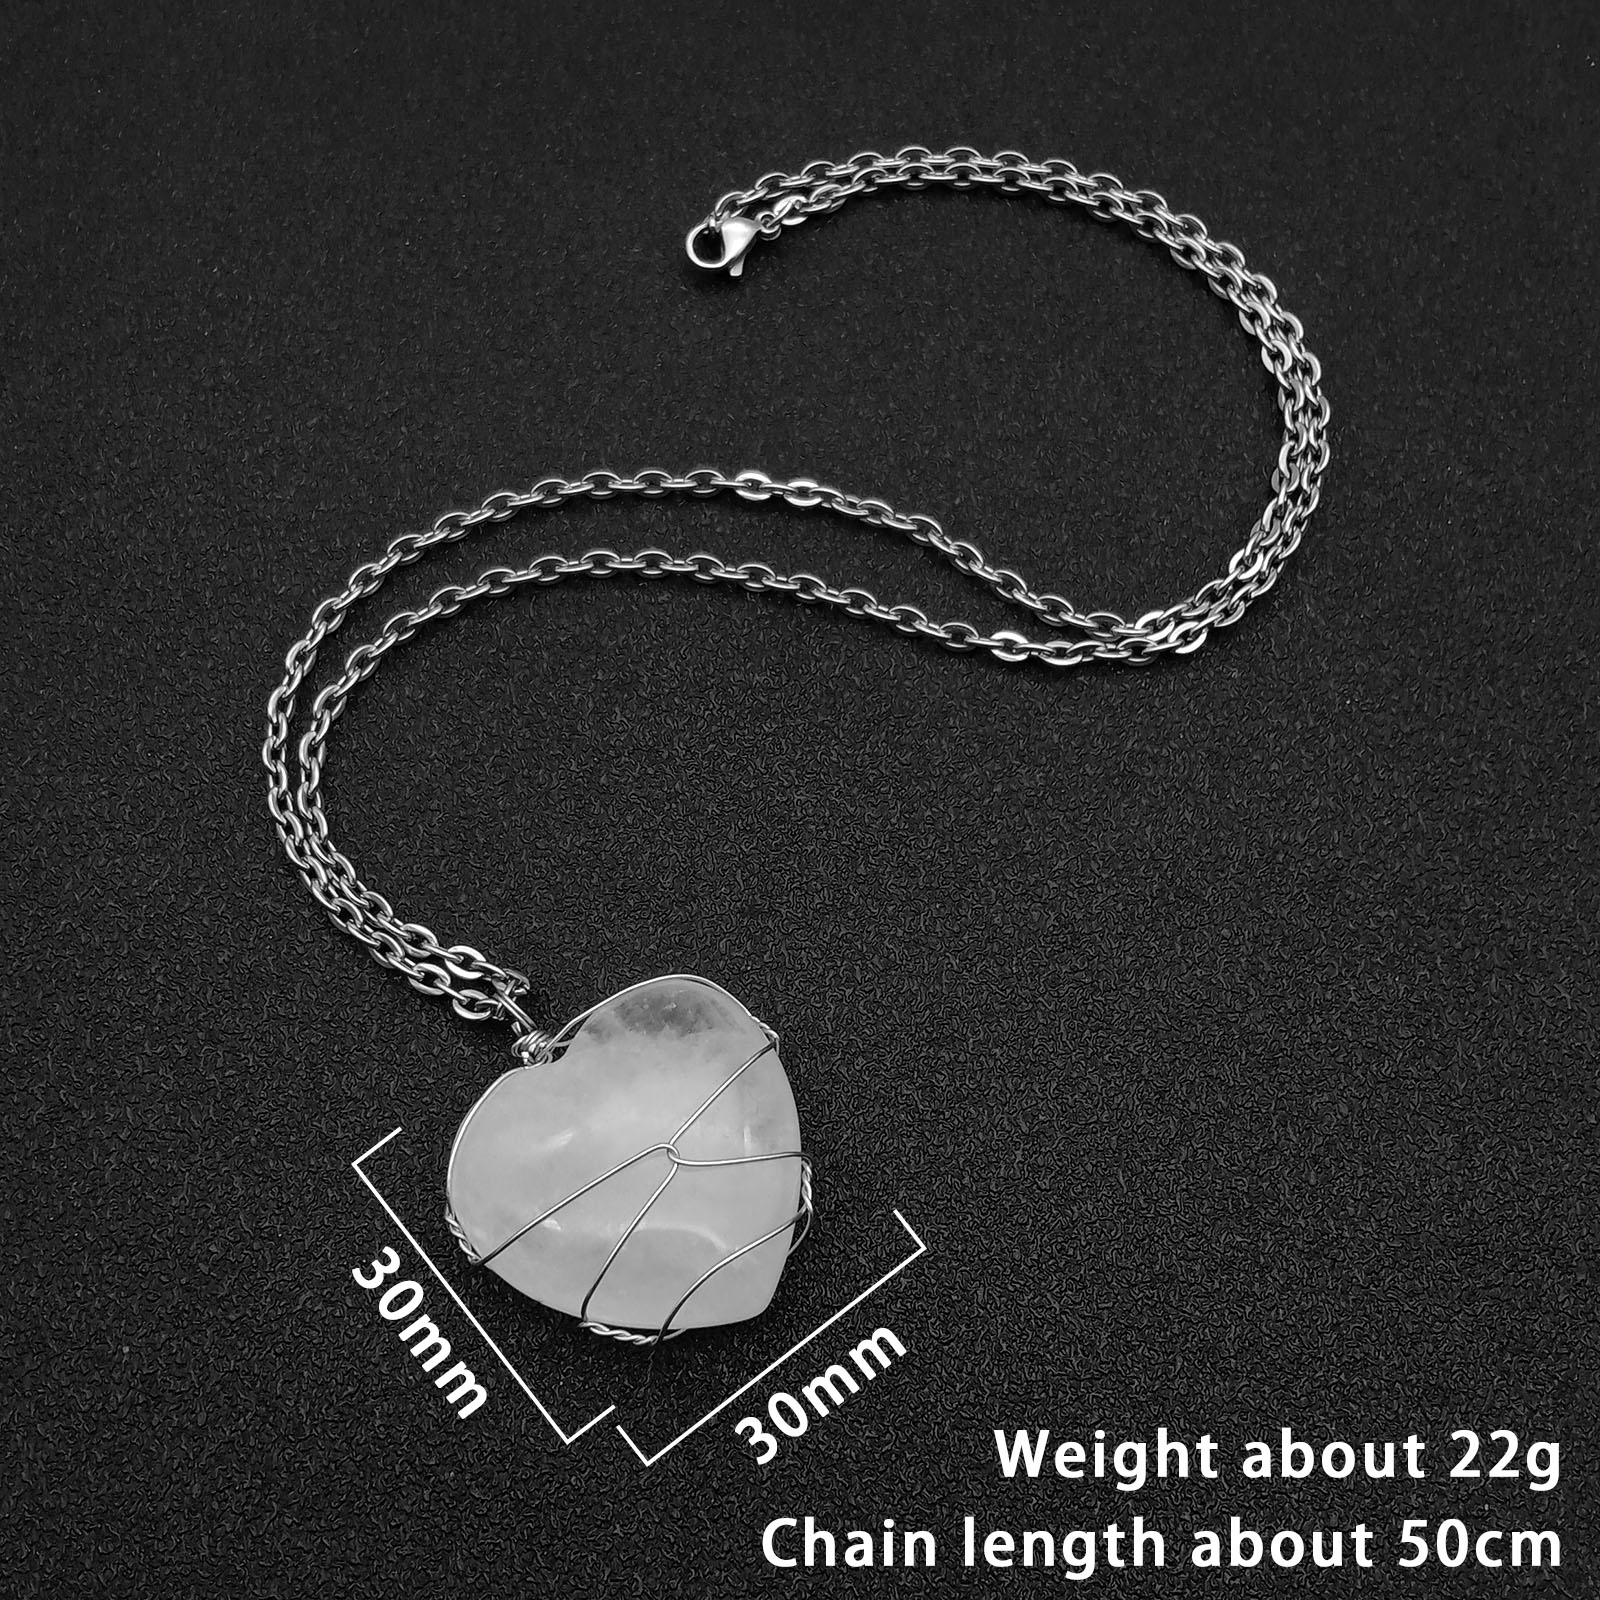 1:The pendant is about 30mm long, about 30mm high, and the chain is about 50cm long